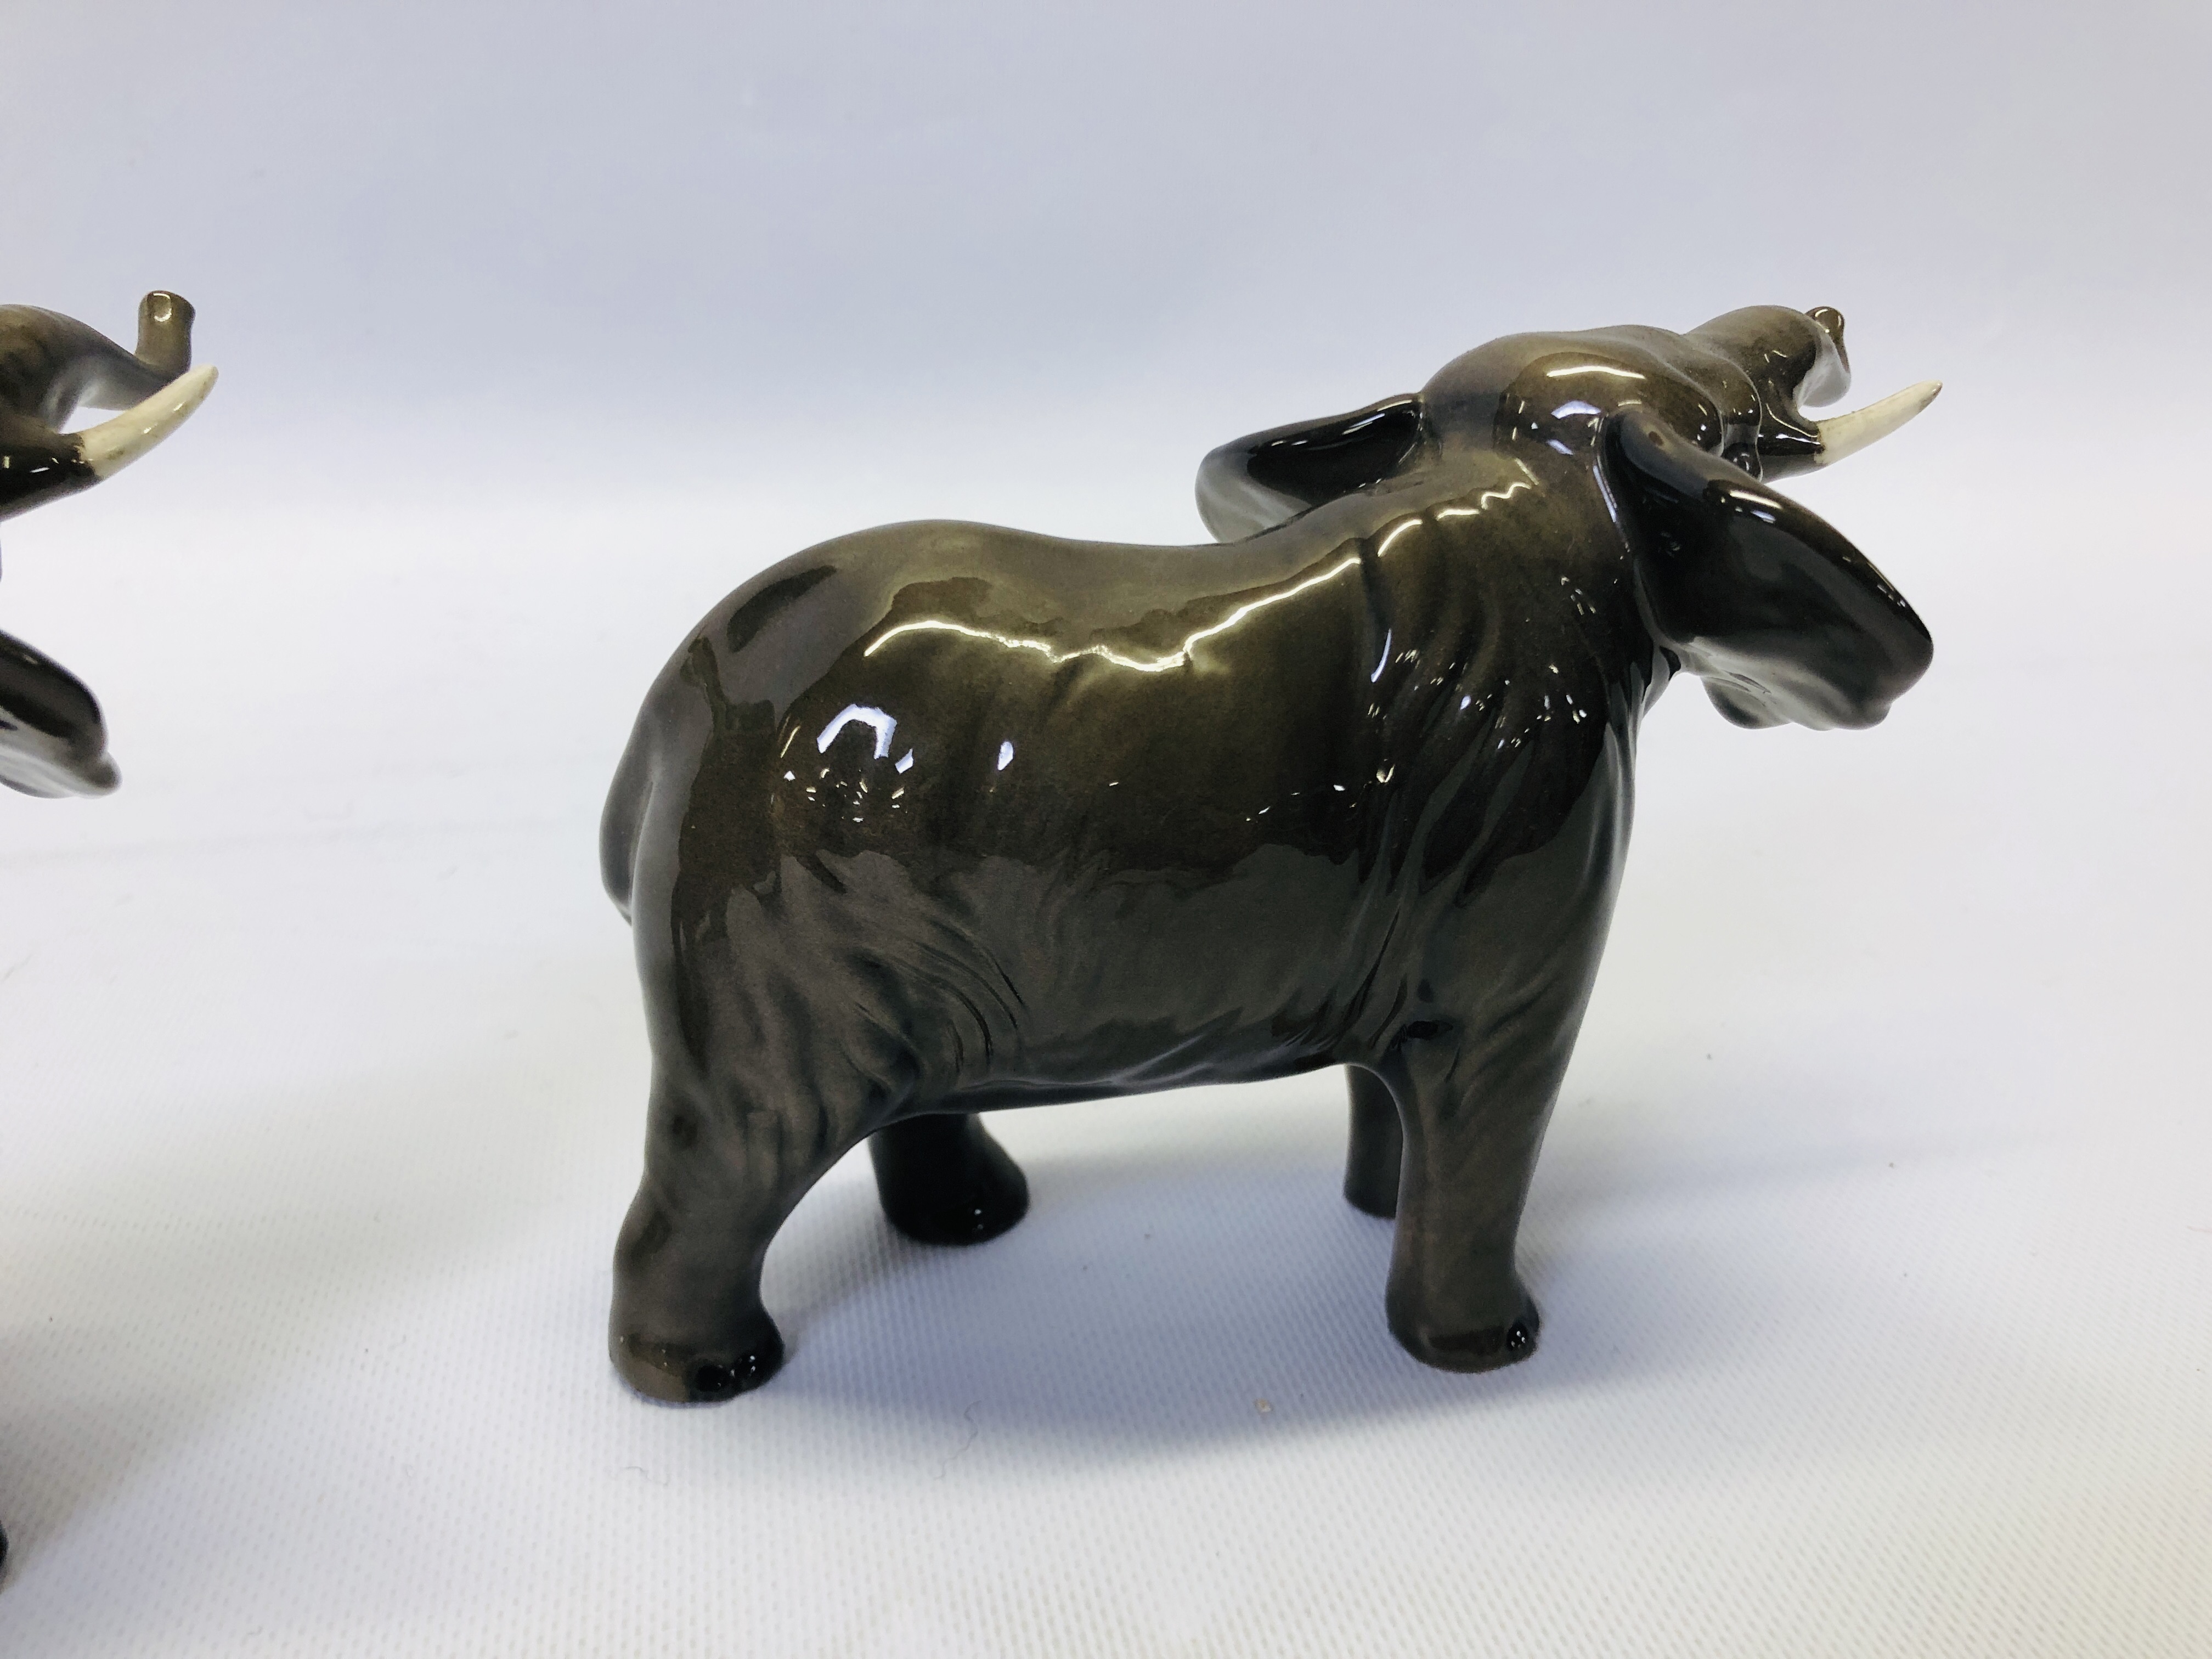 A PAIR OF BESWICK ELEPHANT ORNAMENTS - HEIGHT 12CM. - Image 6 of 7